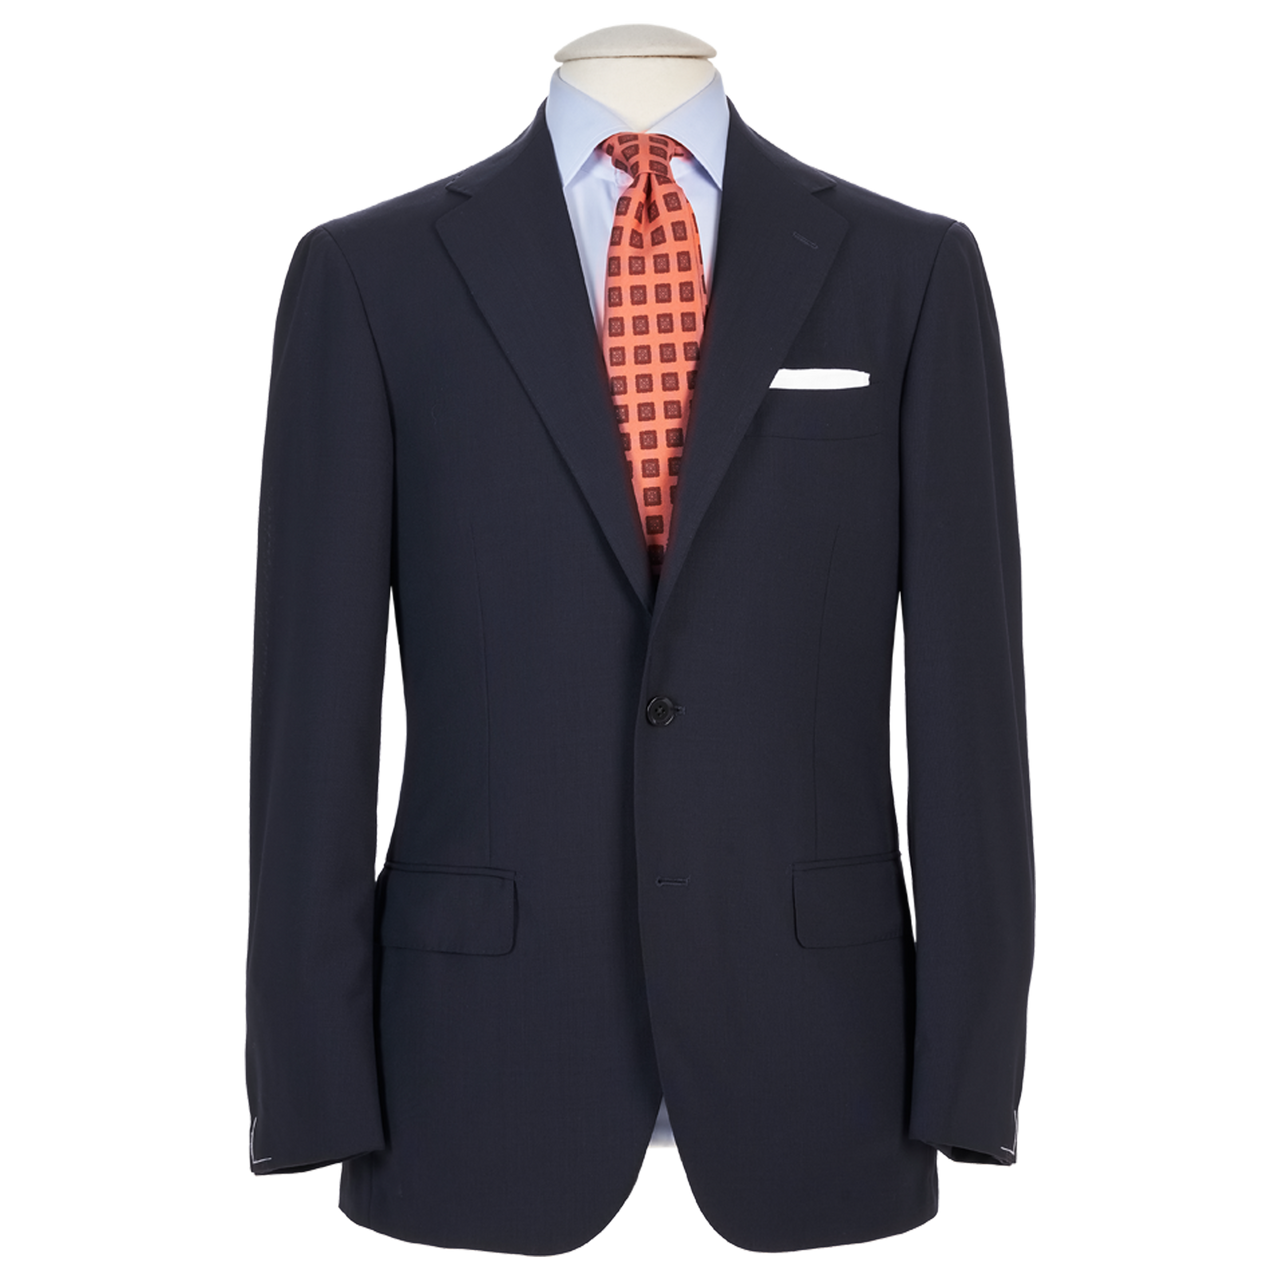 Ring Jacket Suit 301A-S186 in Navy 3-Ply Plain Weave Wool